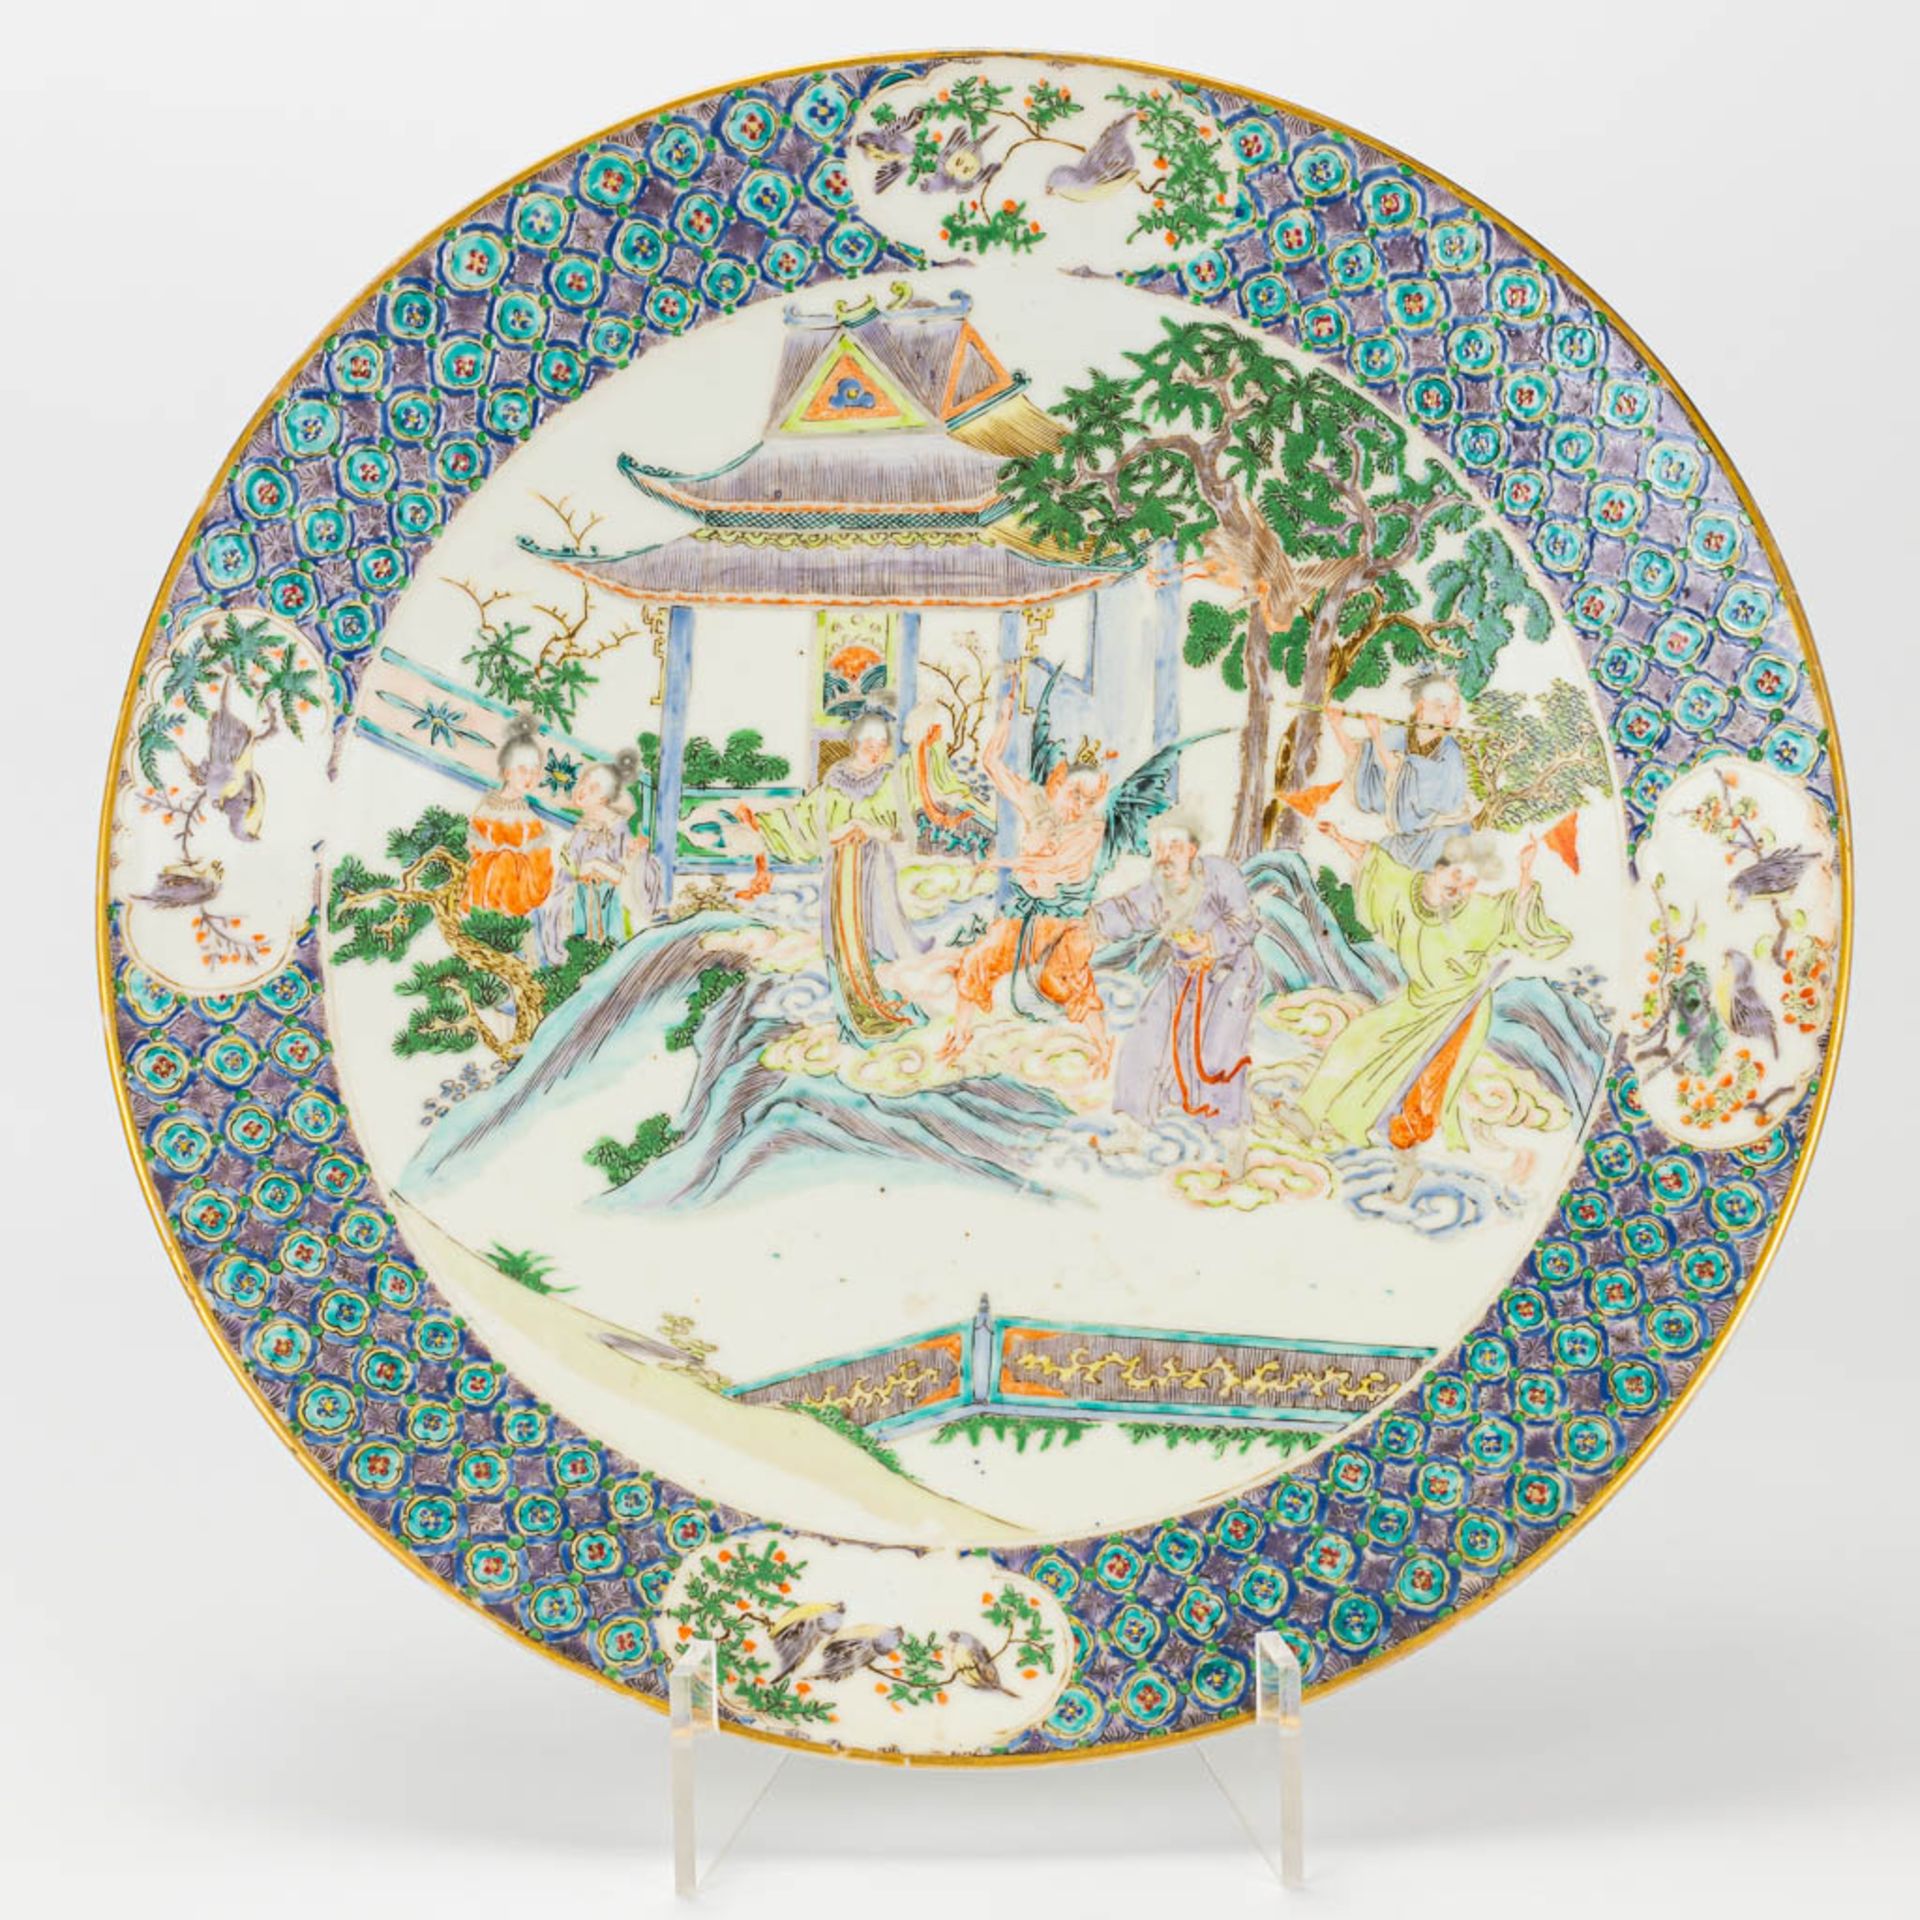 A pair of plates made of Chinese porcelain in Kanton style. 19th century. - Image 21 of 24